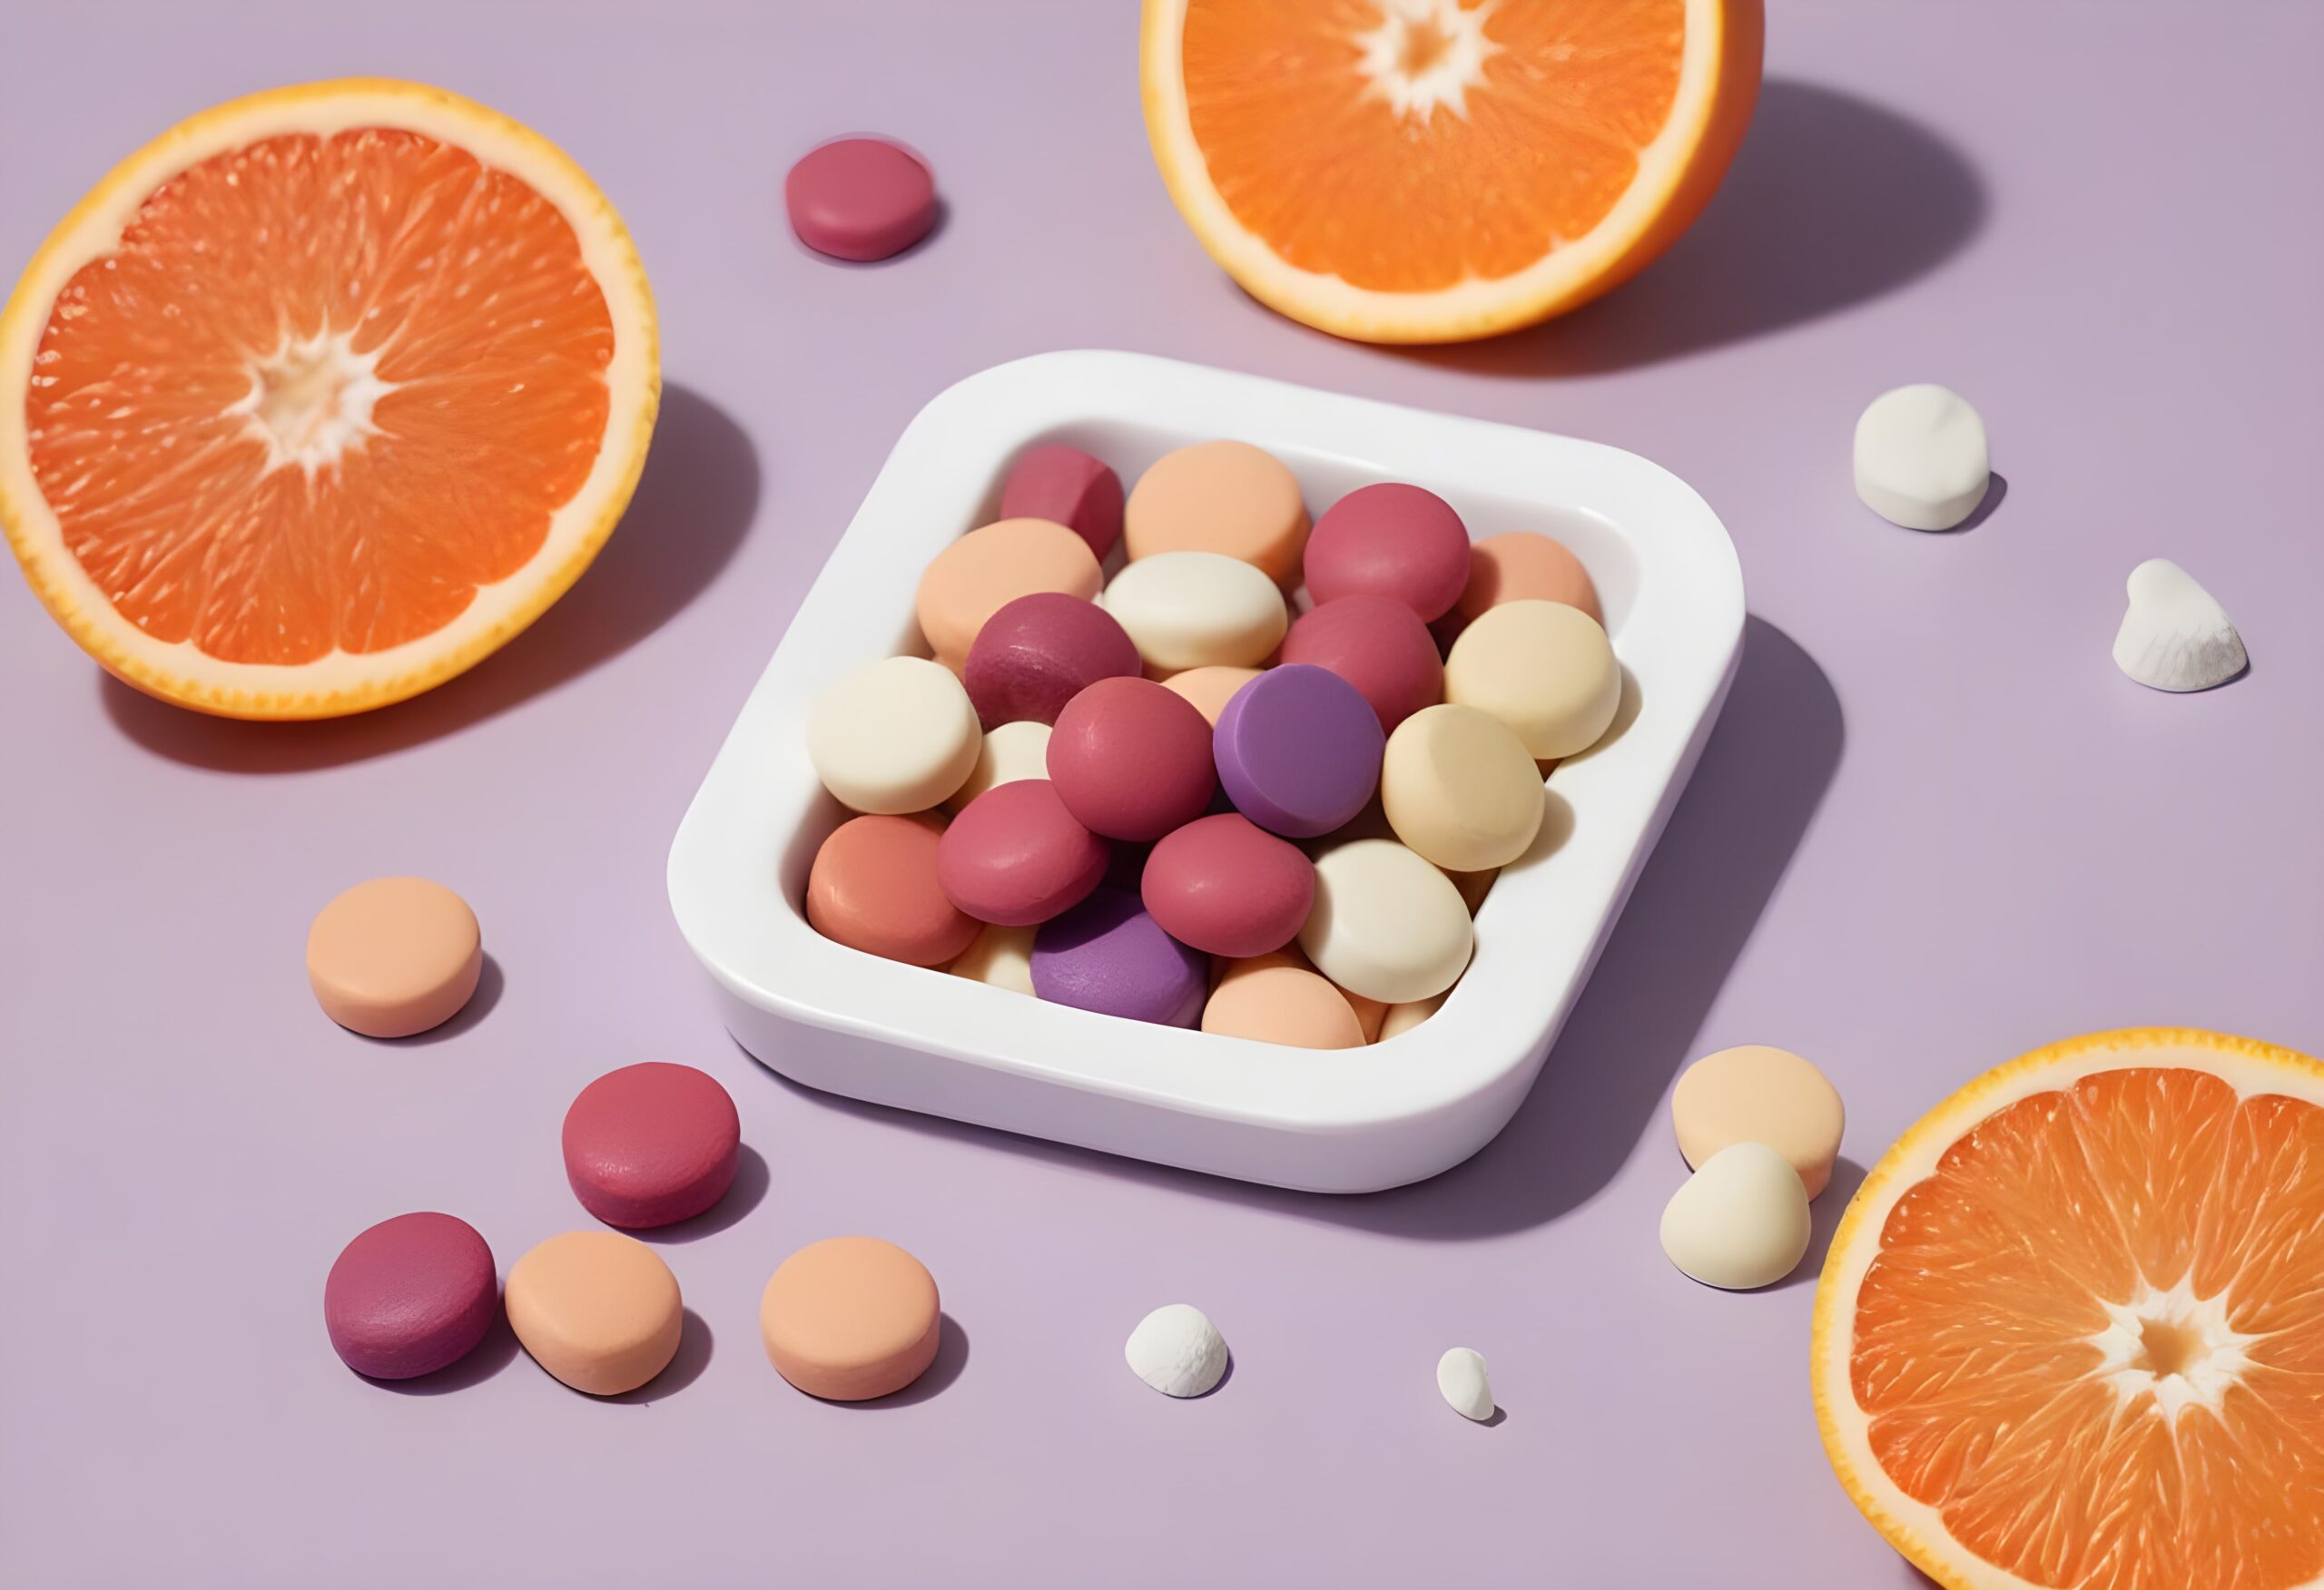 Nutricosmetic tablets and oranges sustainable beauty